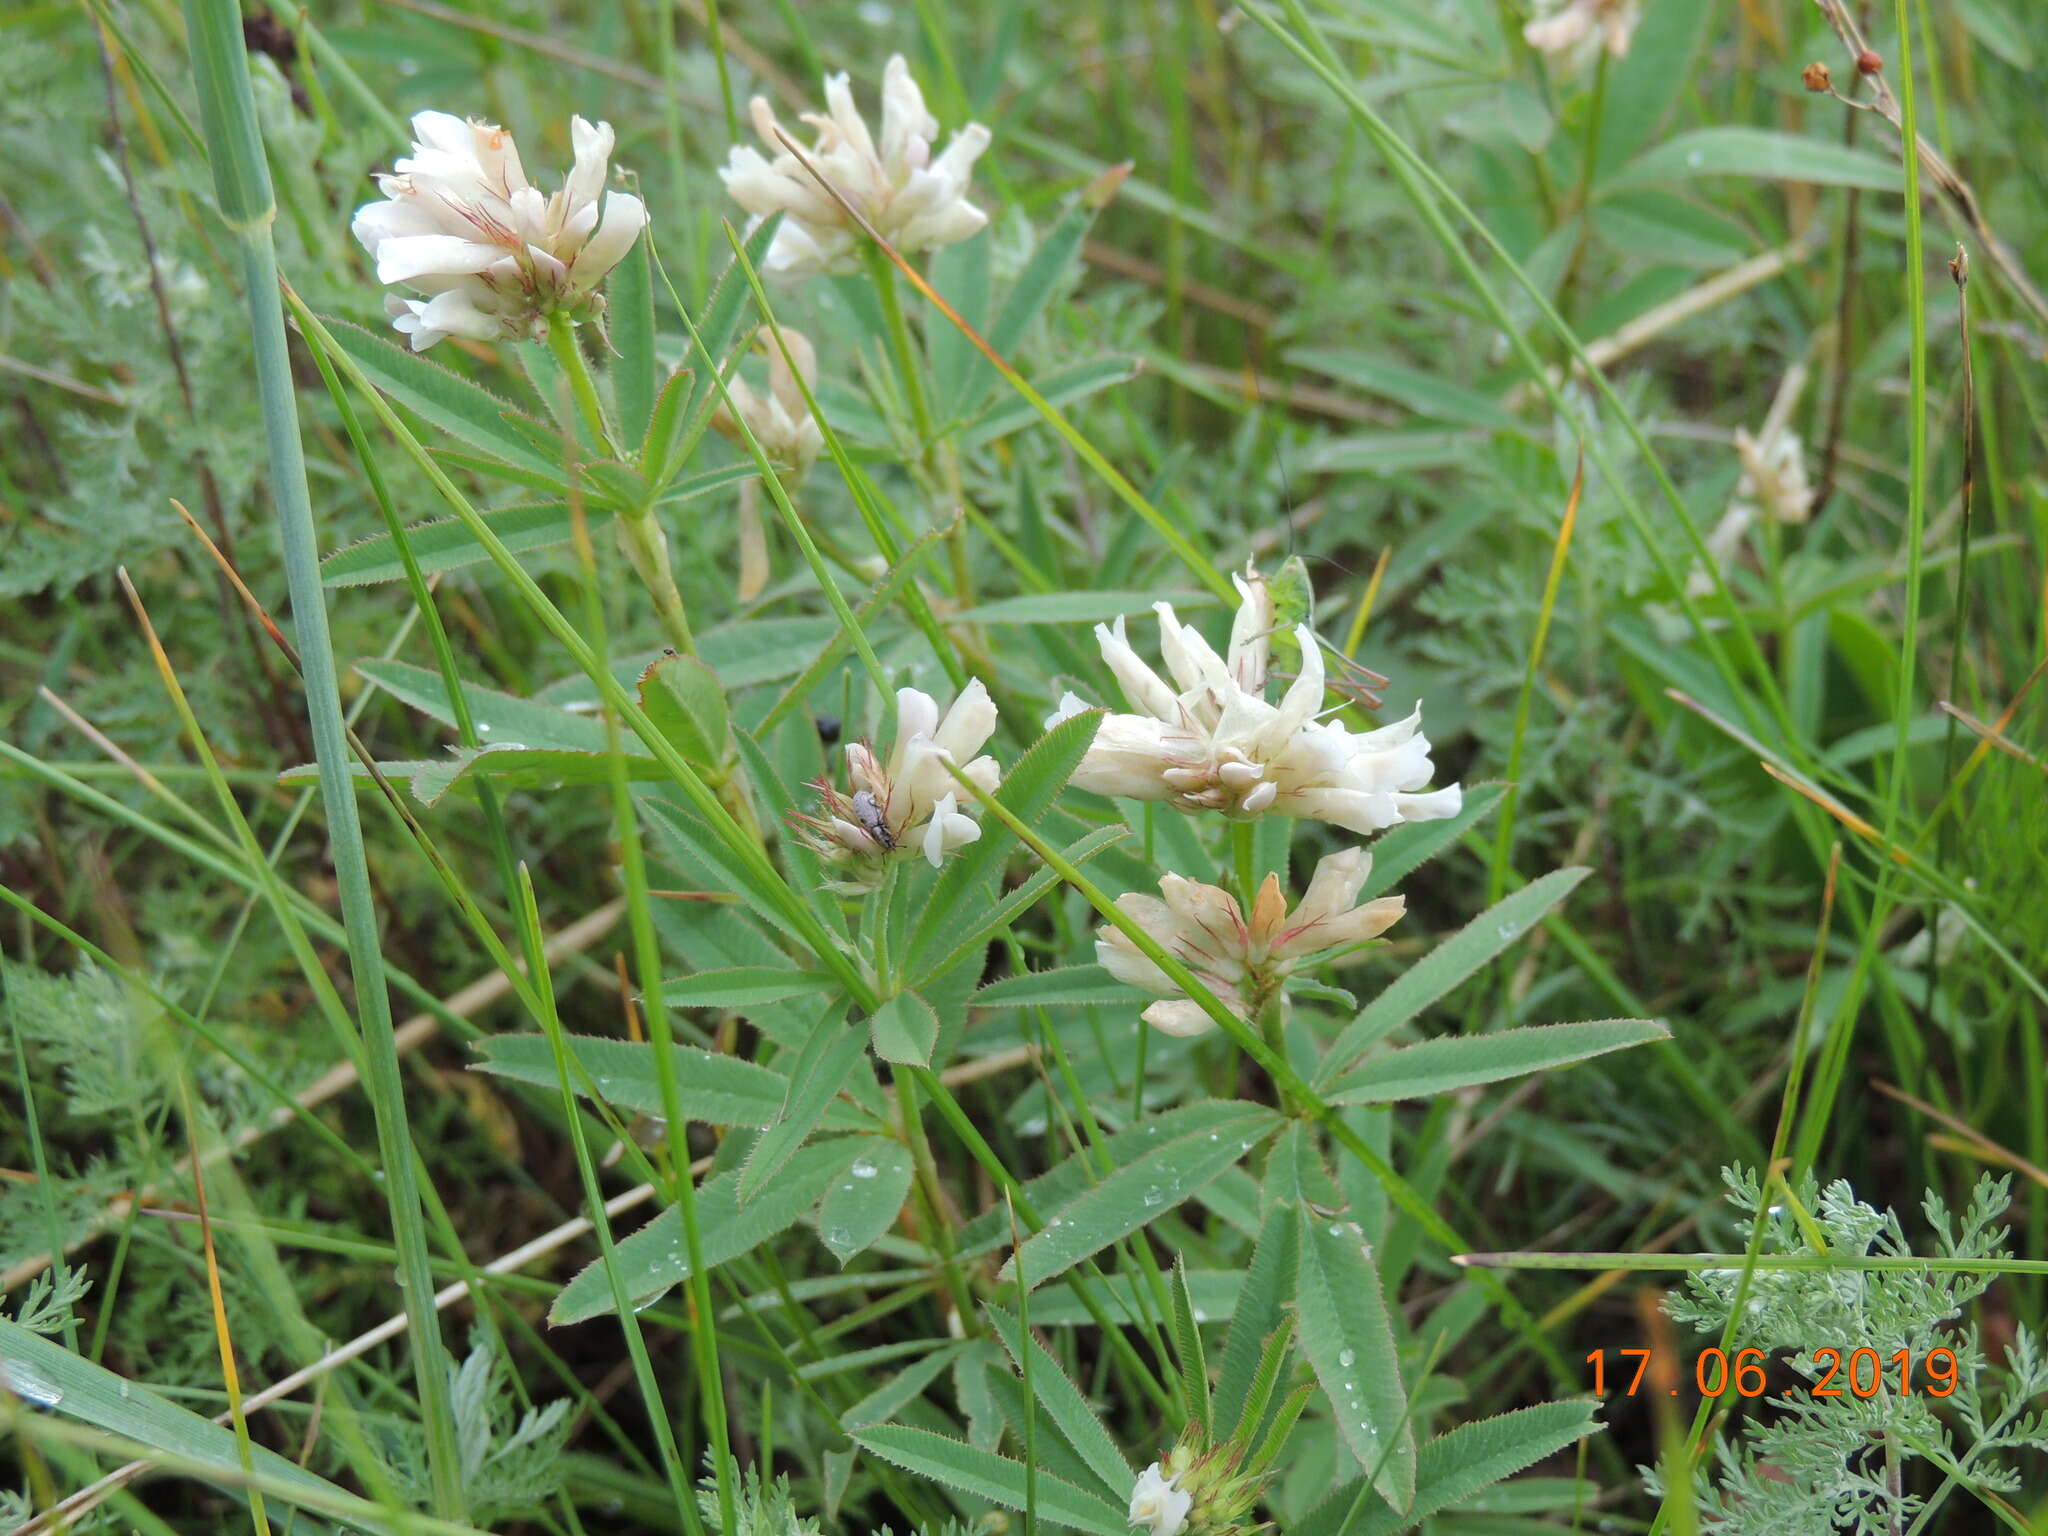 Image of lupine clover